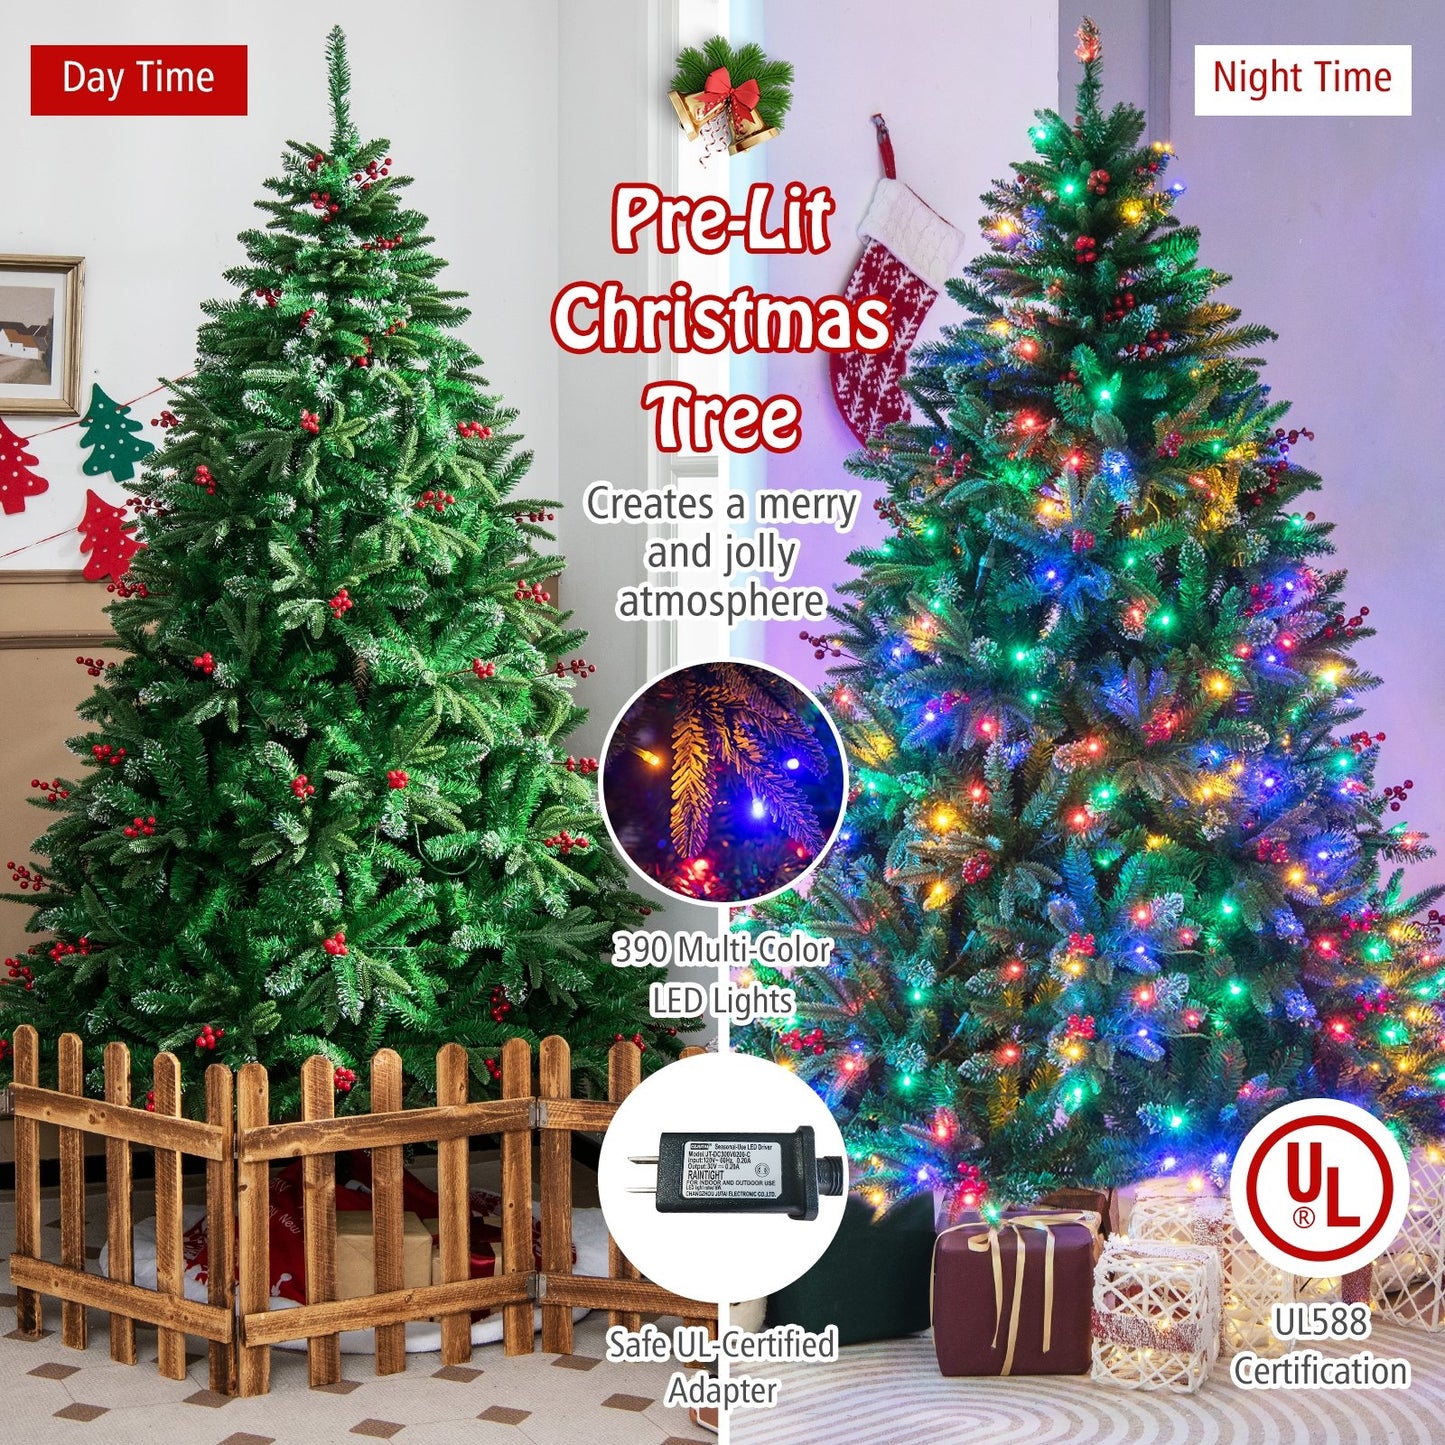 7 FT Pre-Lit Artificial Christmas Tree 390 Multi-Color LED Lights, Green